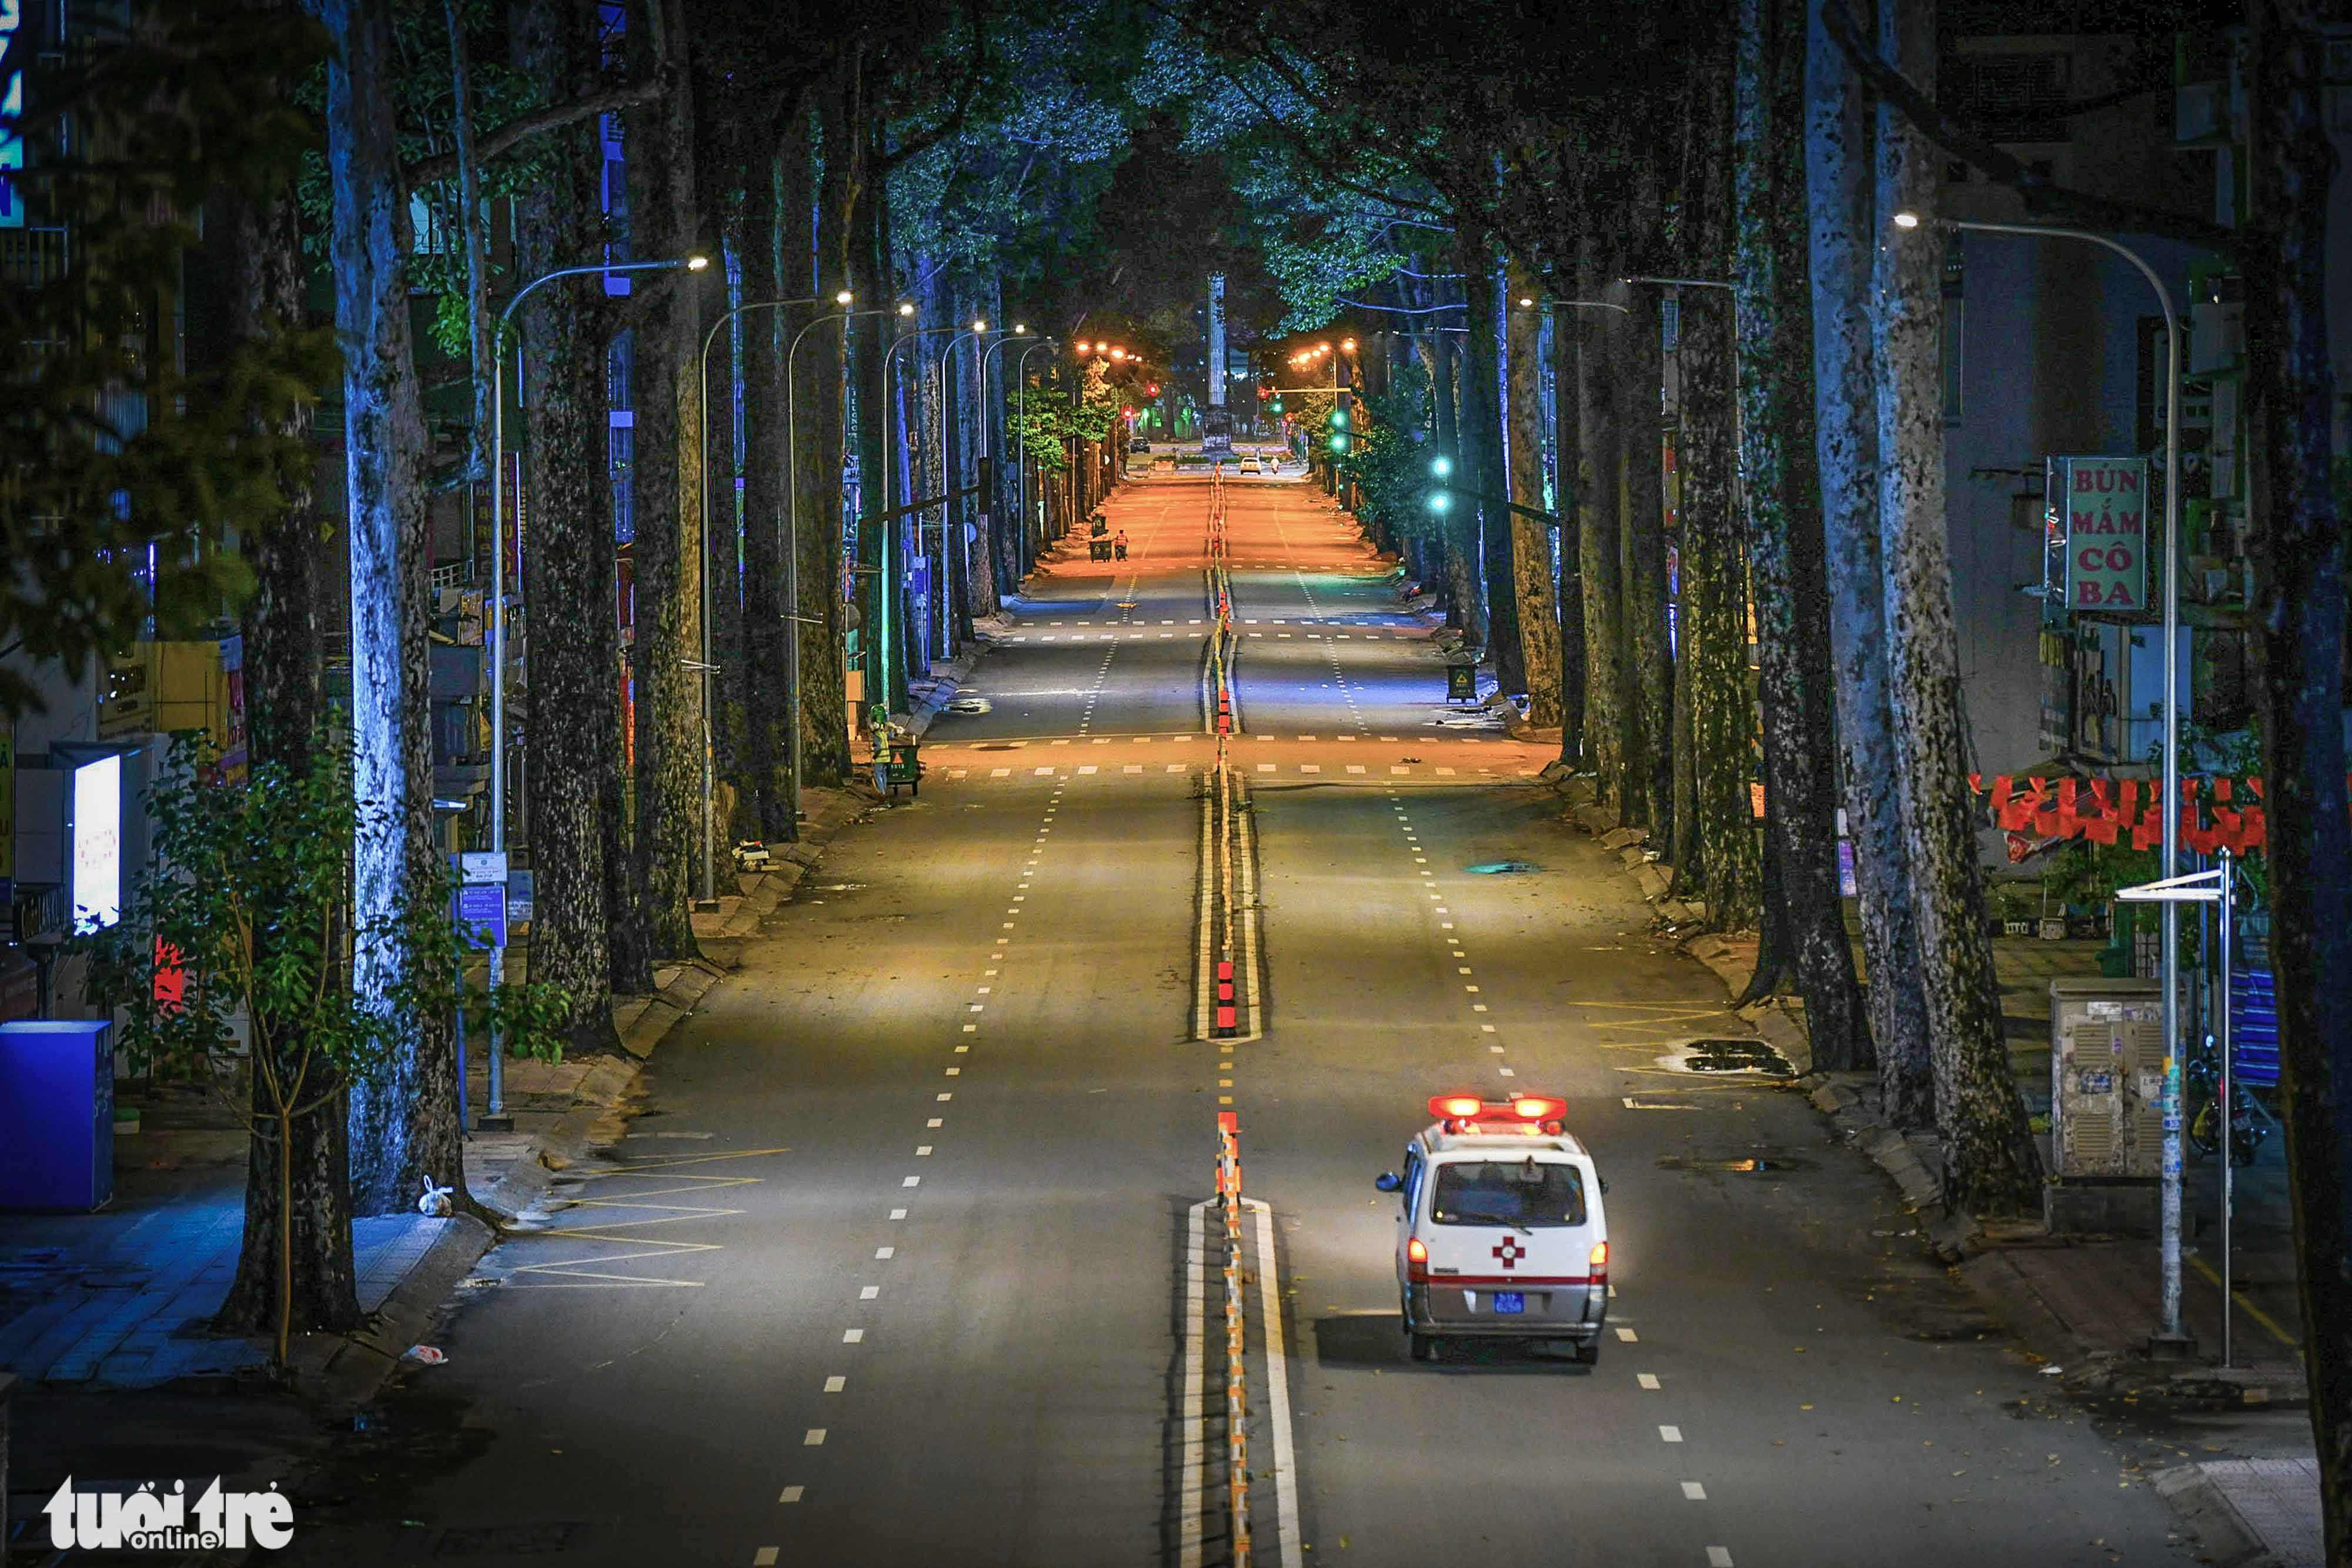 An ambulance travels along an empty street in District 10, Ho Chi Minh City at 7:00 pm on July 27, 2021, after municipal authorities began enforcing a moment restriction order after 6:00 pm to curb the pandemic. Photo: Quang Dinh / Tuoi Tre